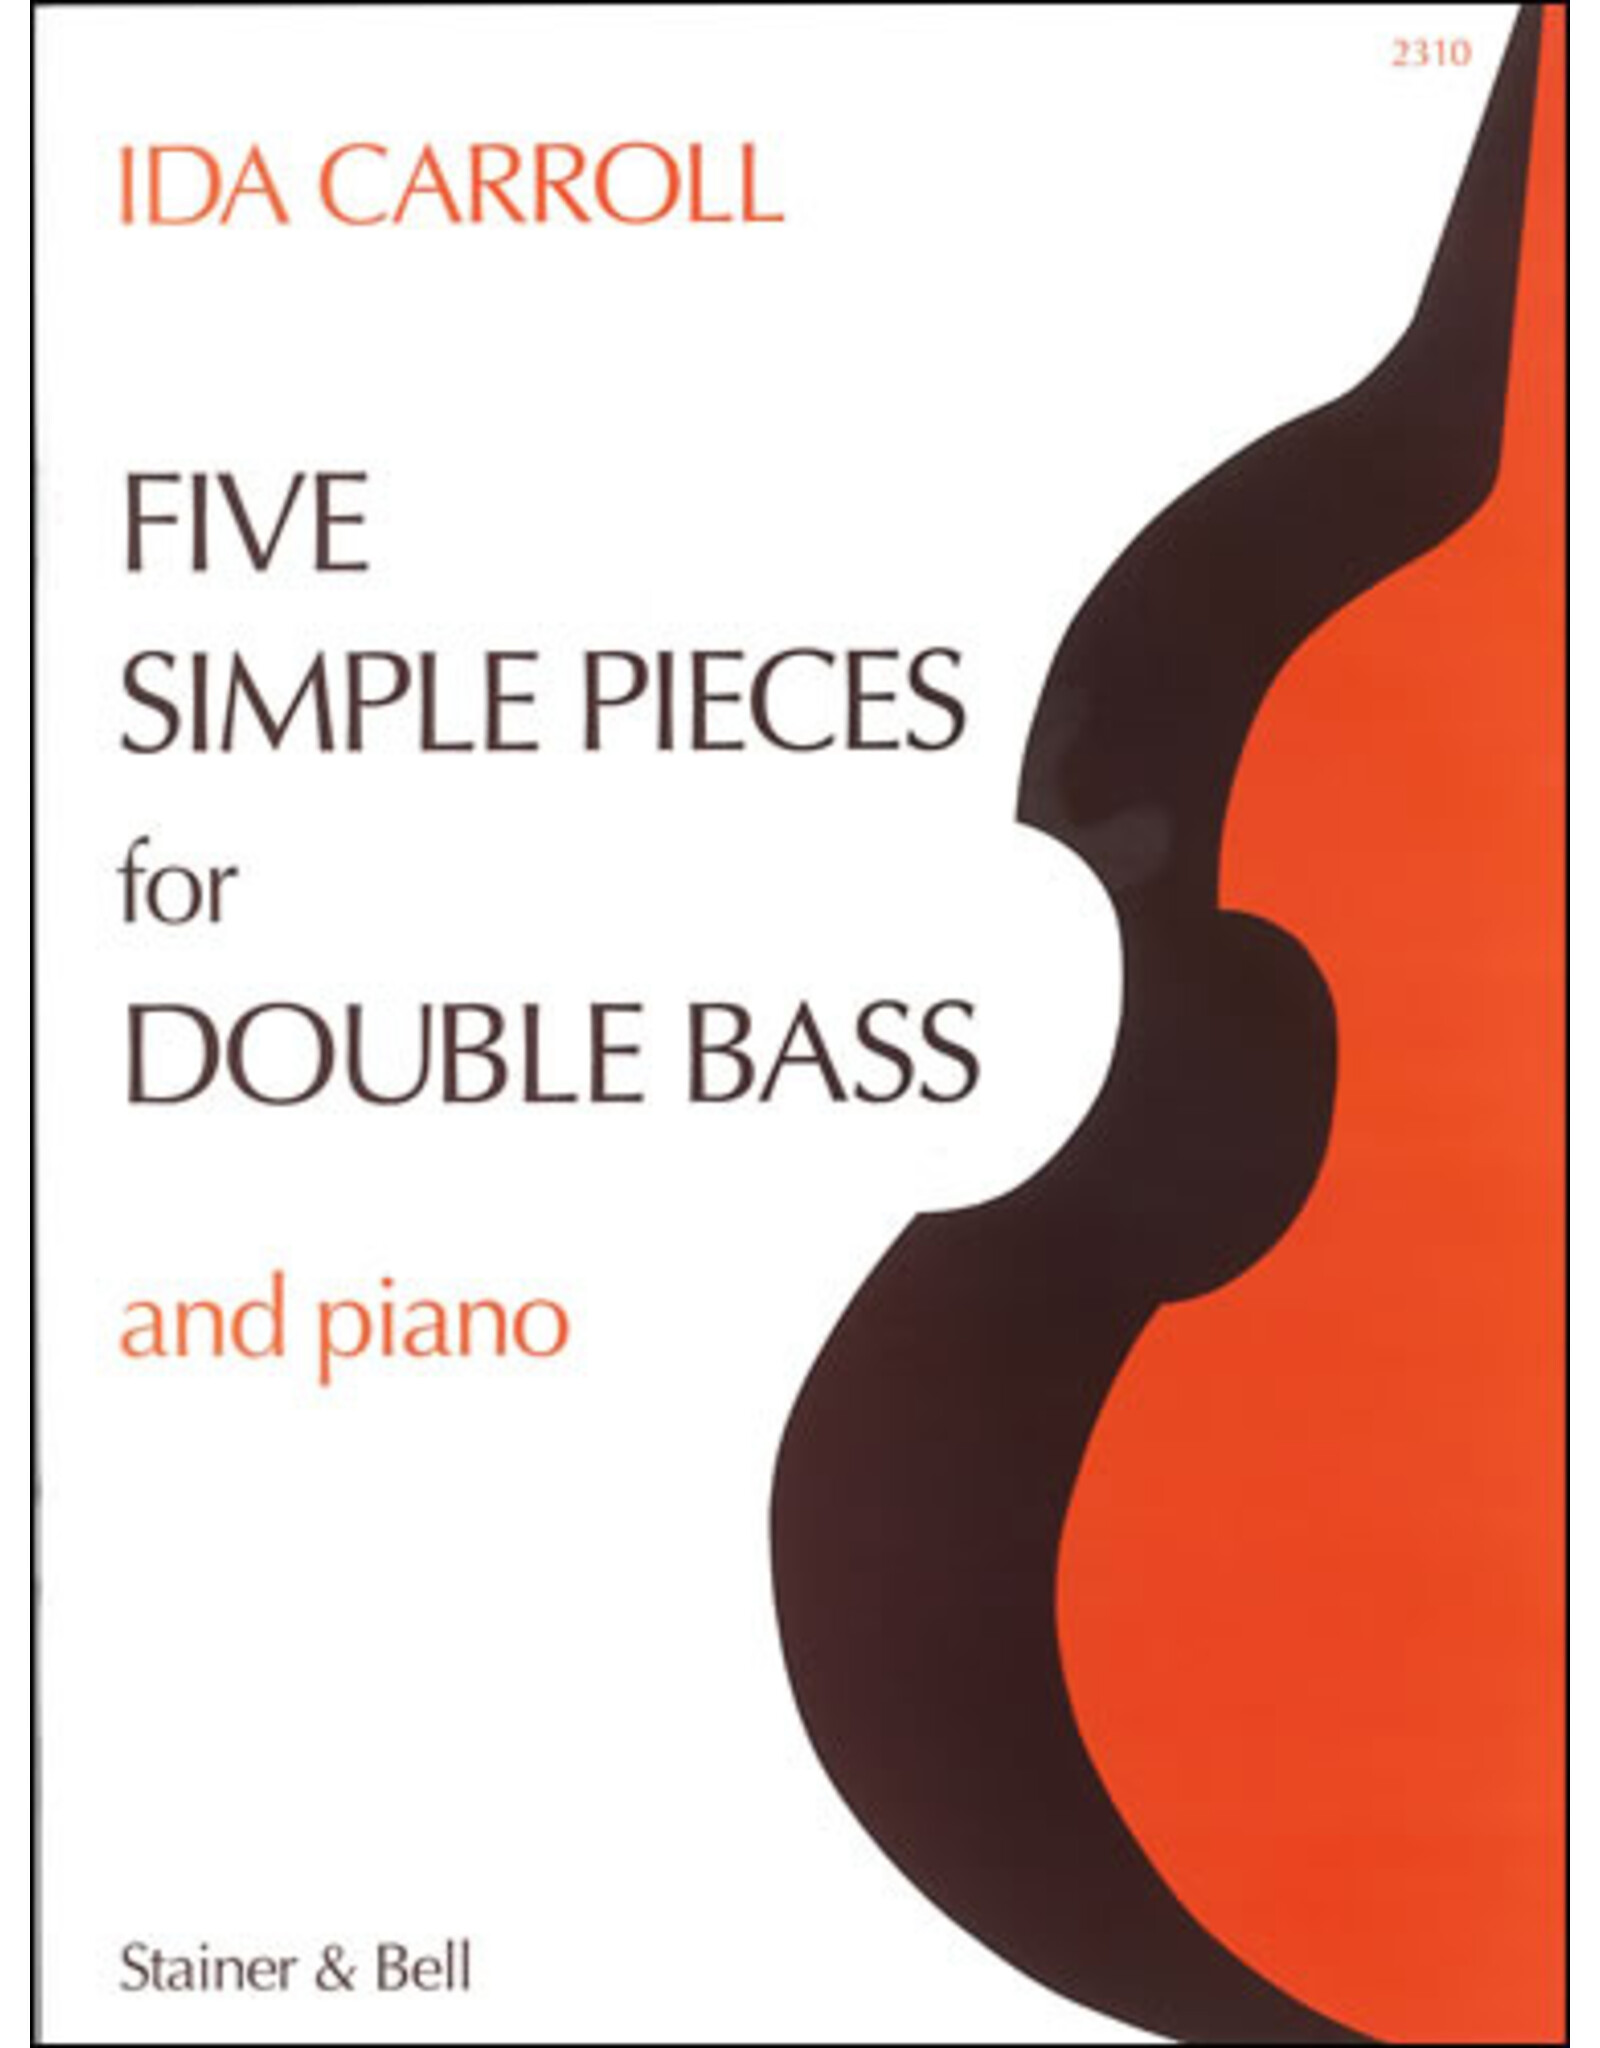 Stainer & Bell Five Simple Pieces for Double Bass